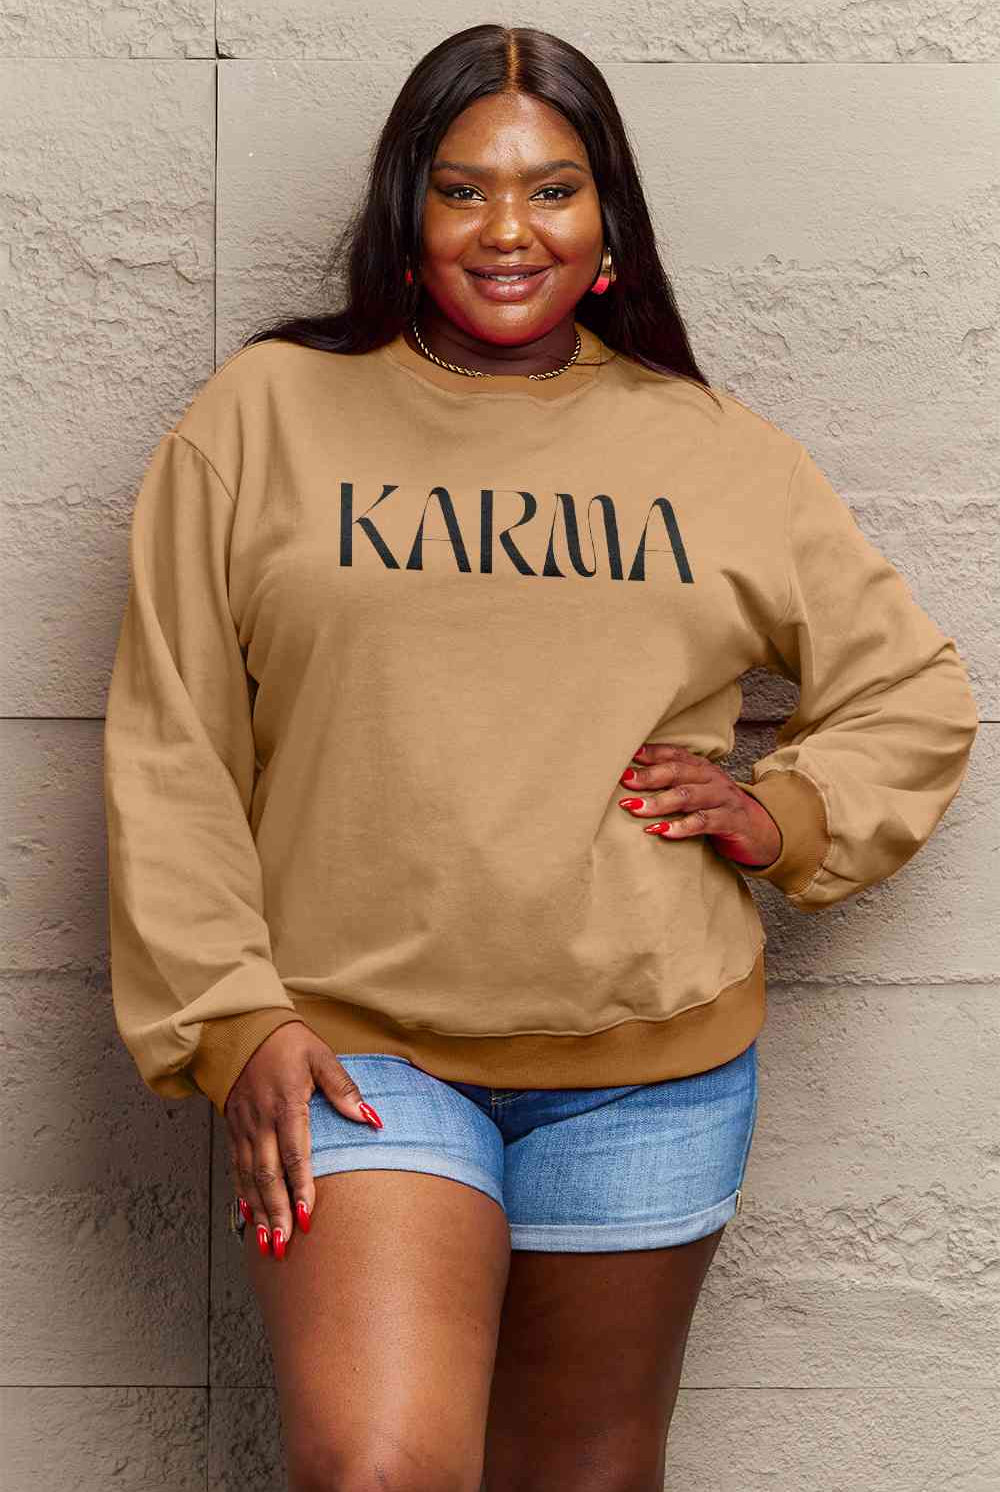 Simply Love Full Size KARMA Graphic Sweatshirt - GemThreads Boutique